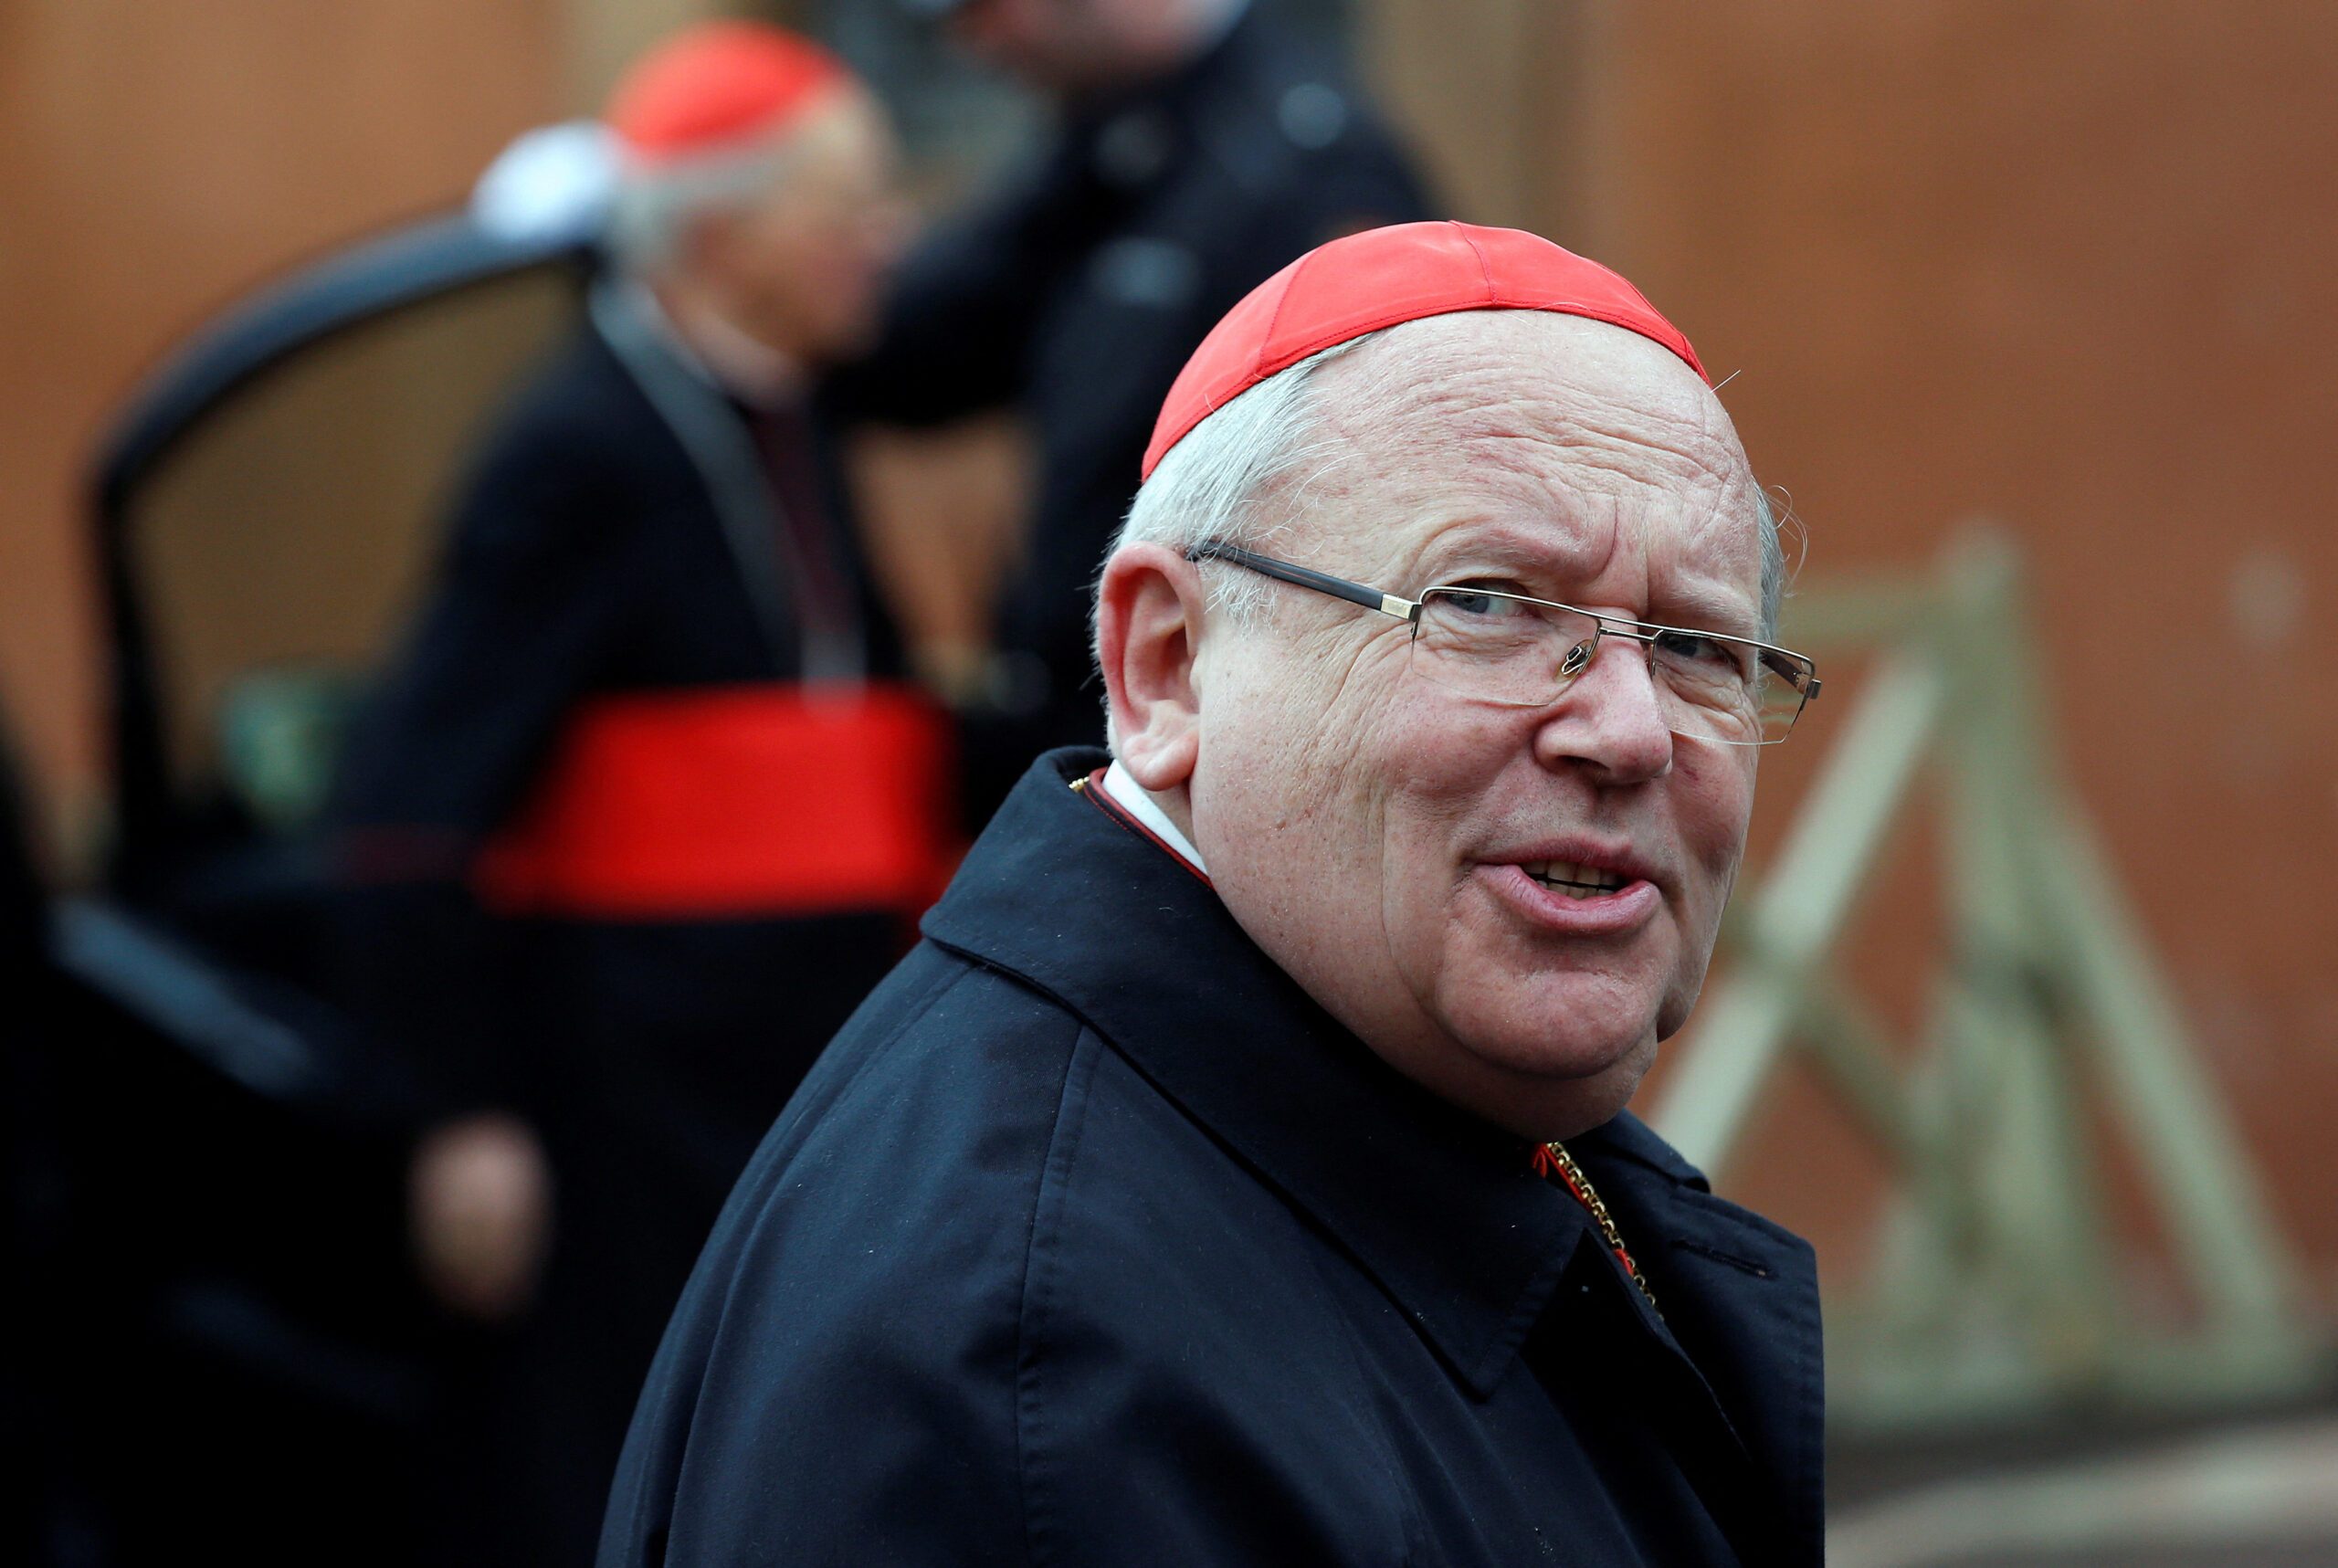 Vatican to investigate French cardinal who abused 14-year-old girl